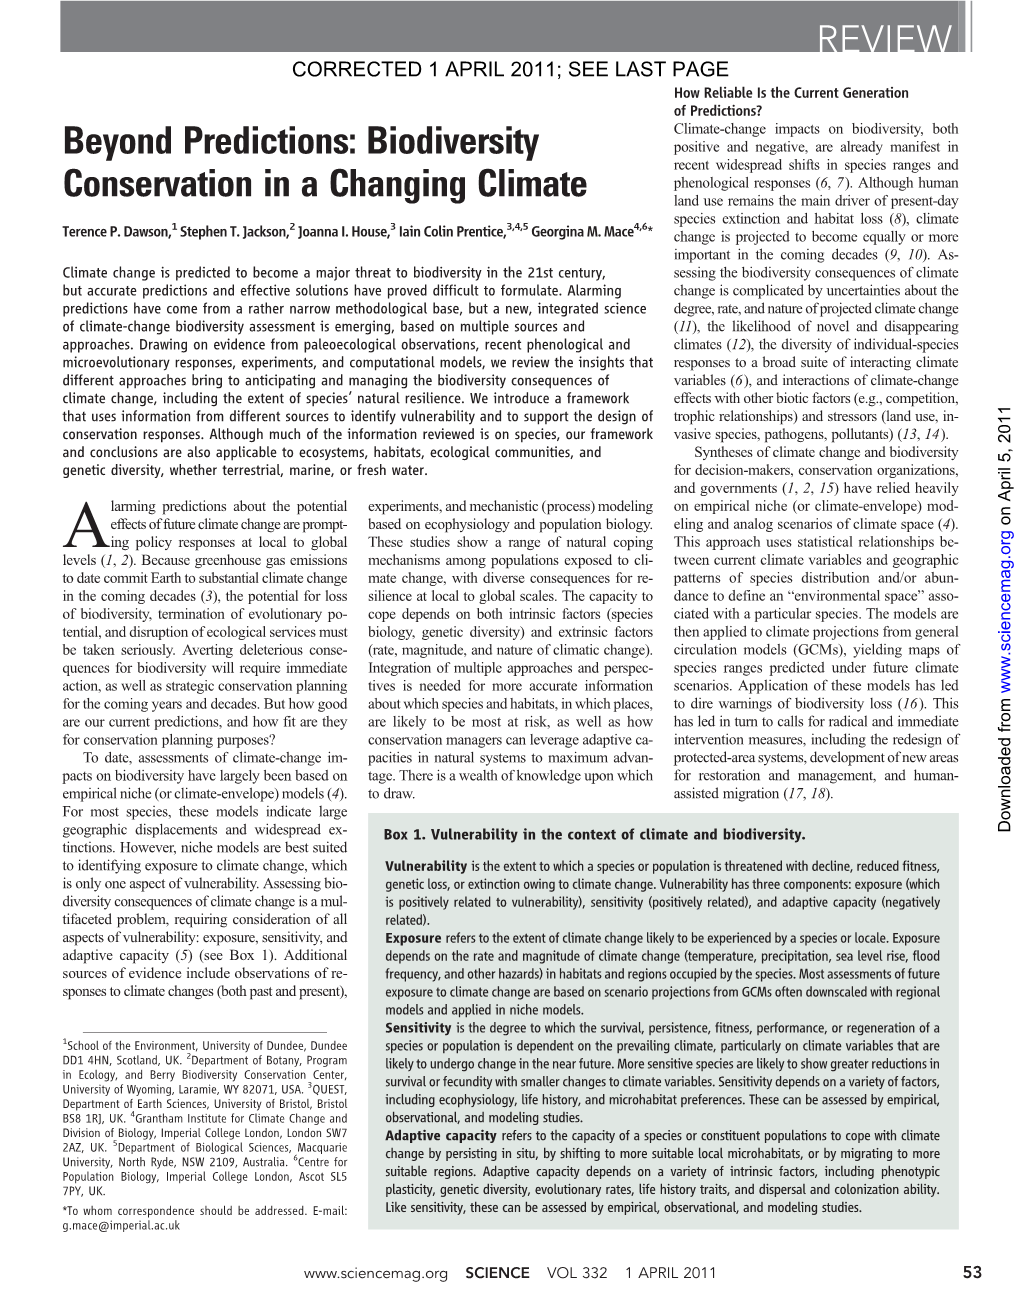 Beyond Predictions: Biodiversity Conservation in a Changing Climate” by T